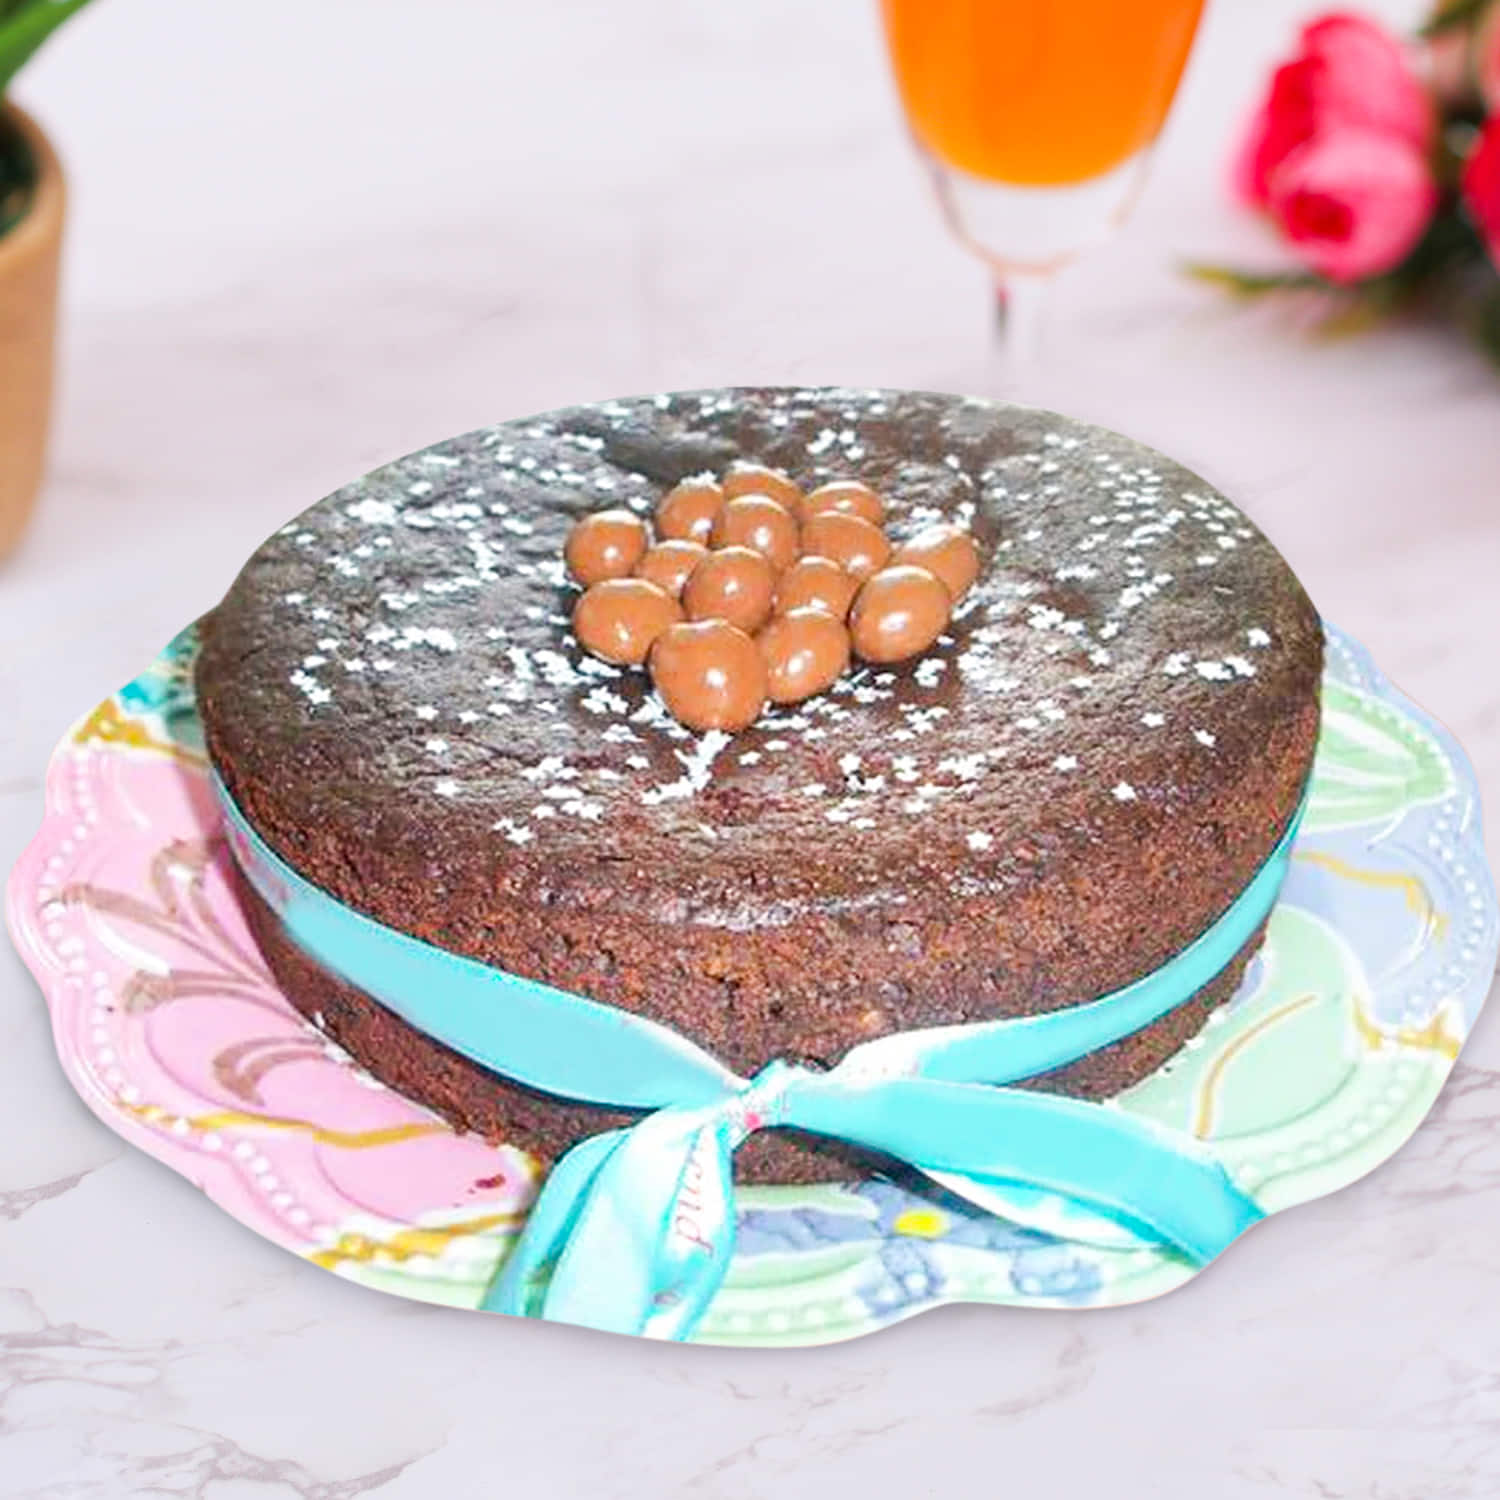 Popular Christmas Cake Recipes: 10 most popular cakes for Christmas | Times  of India